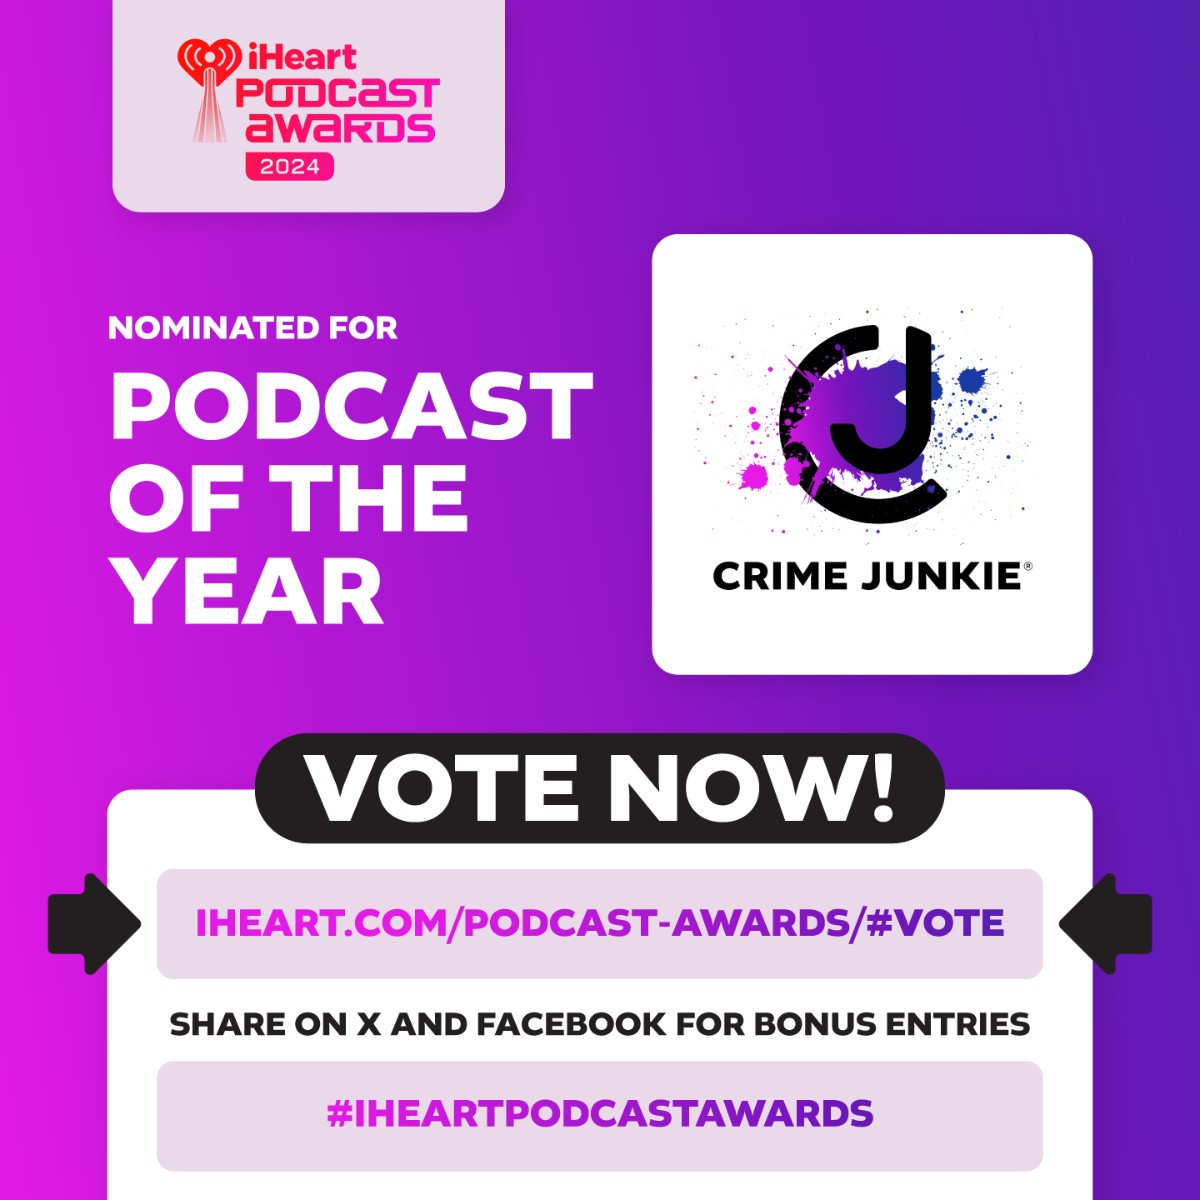 Crime Junkie is up for iHeart’s Podcast of the Year Award & Full Body Chills is nominated for Best Fiction Podcast! 🎉🖤 You can vote for @CrimeJunkiePod at iheart.com/podcast-awards…. Share your vote to X with #IHEARTPODCASTAWARDS after you're done for bonus entries!